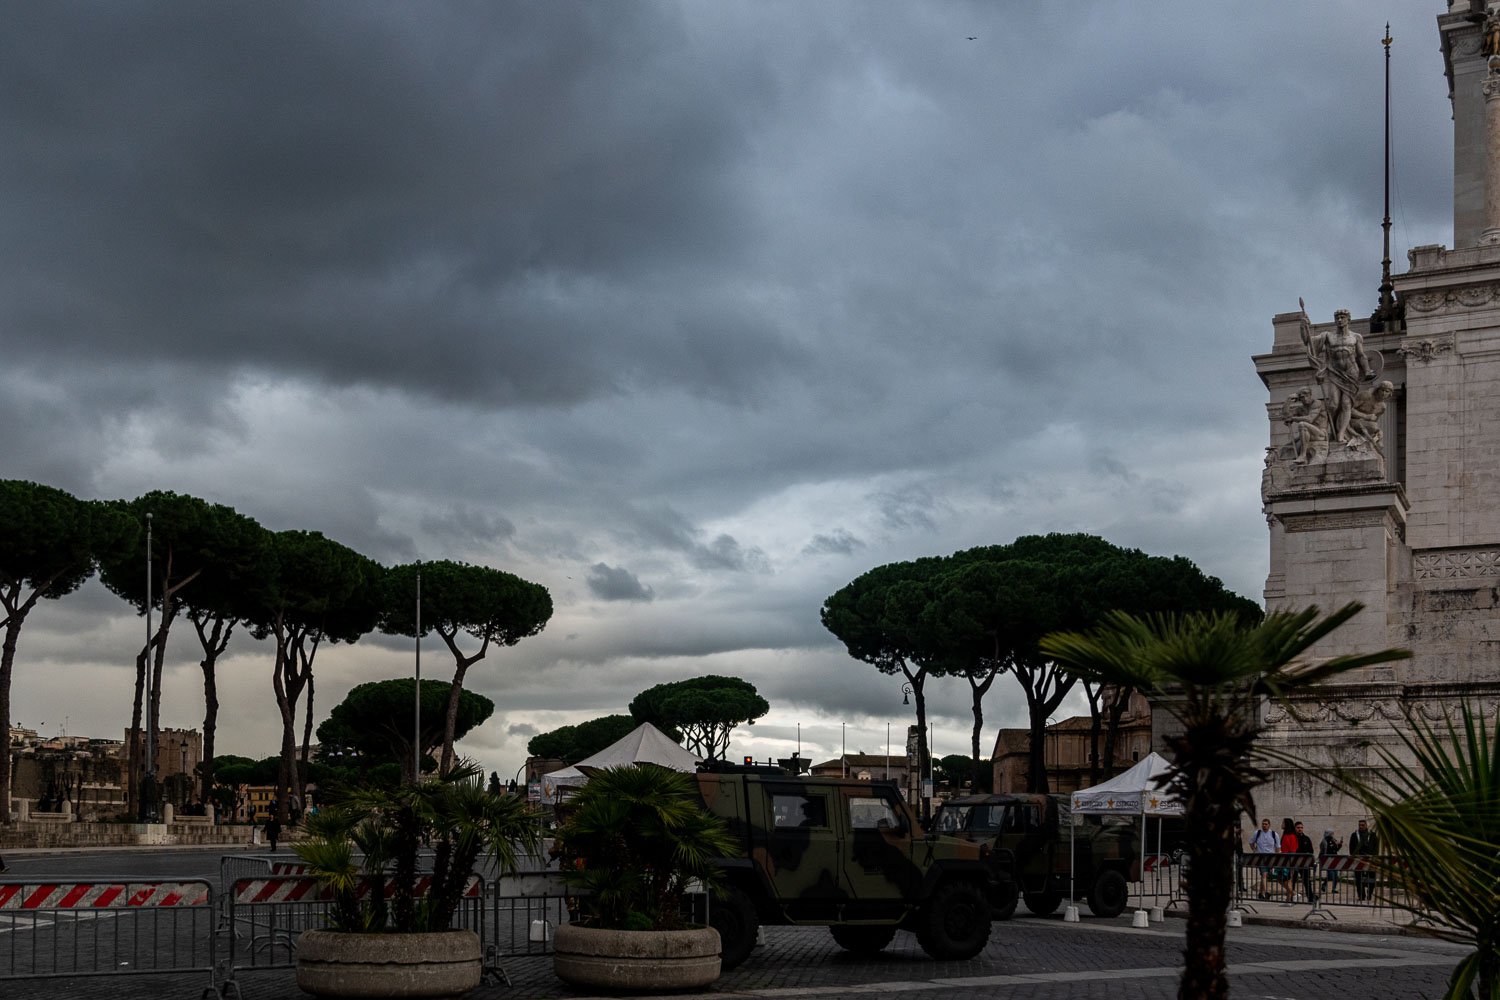 Rome In October - Cooler Weather